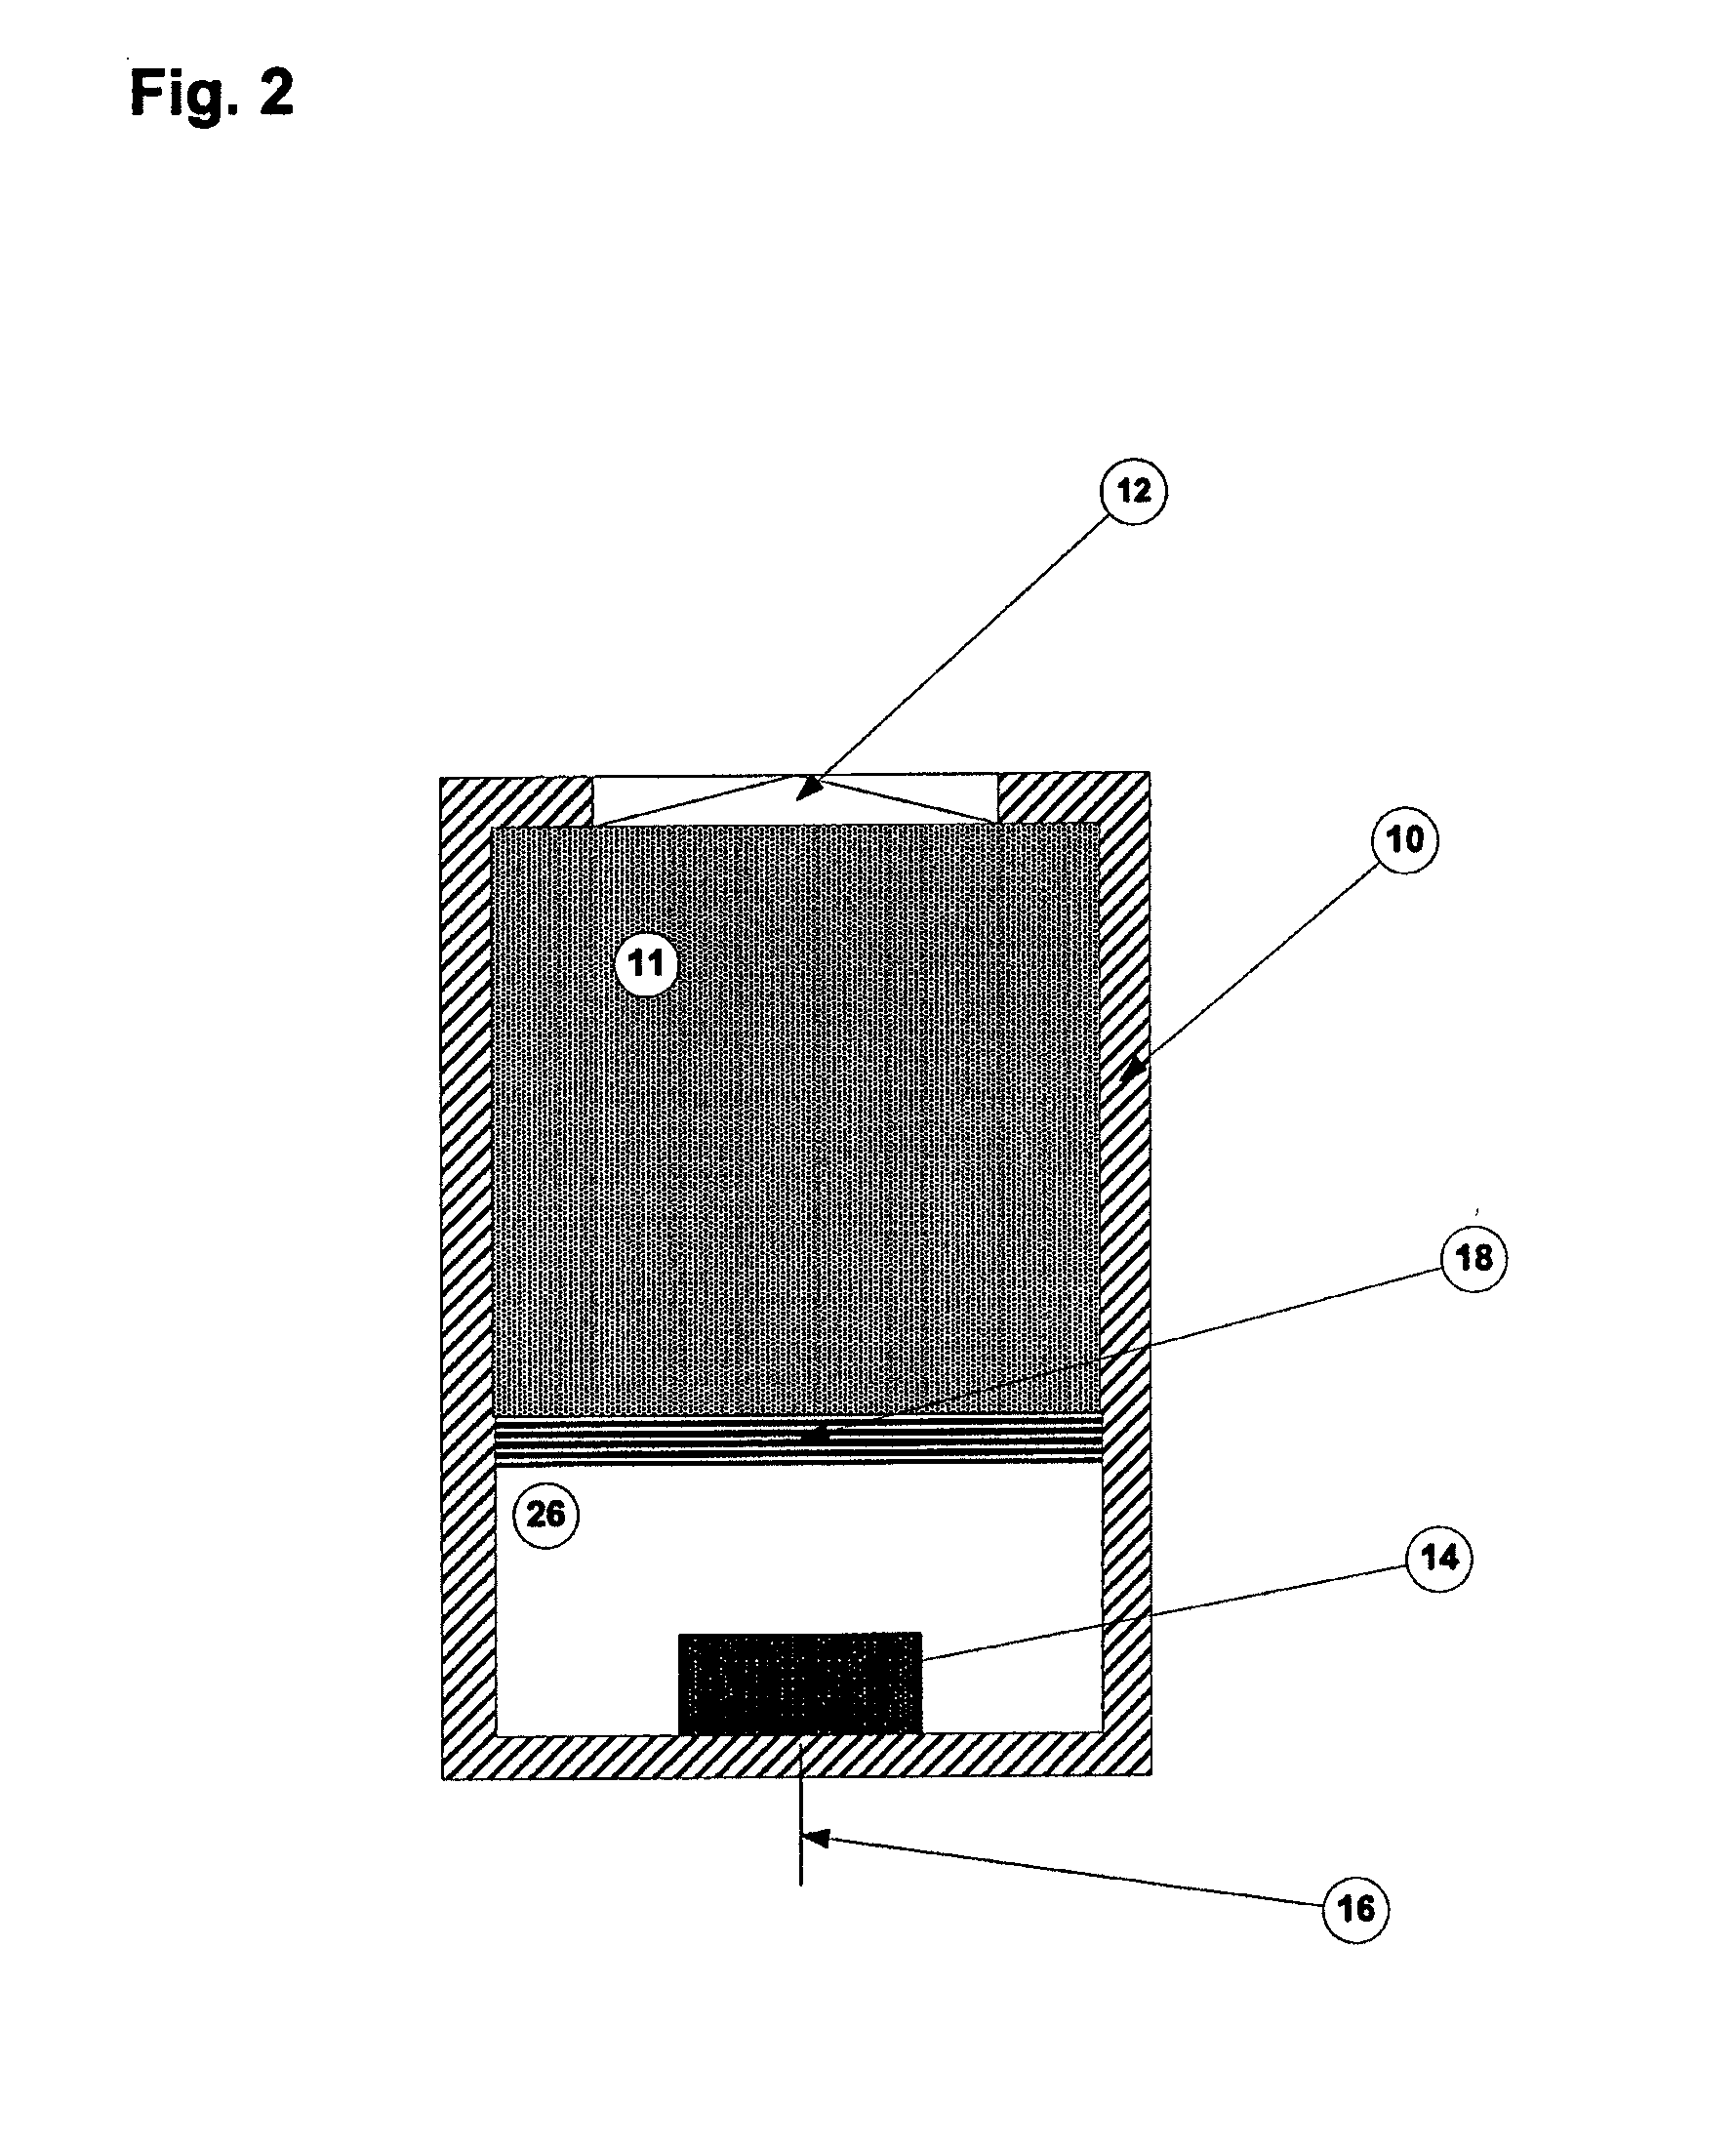 Apparatus and method for distributing irritants or warfare agents